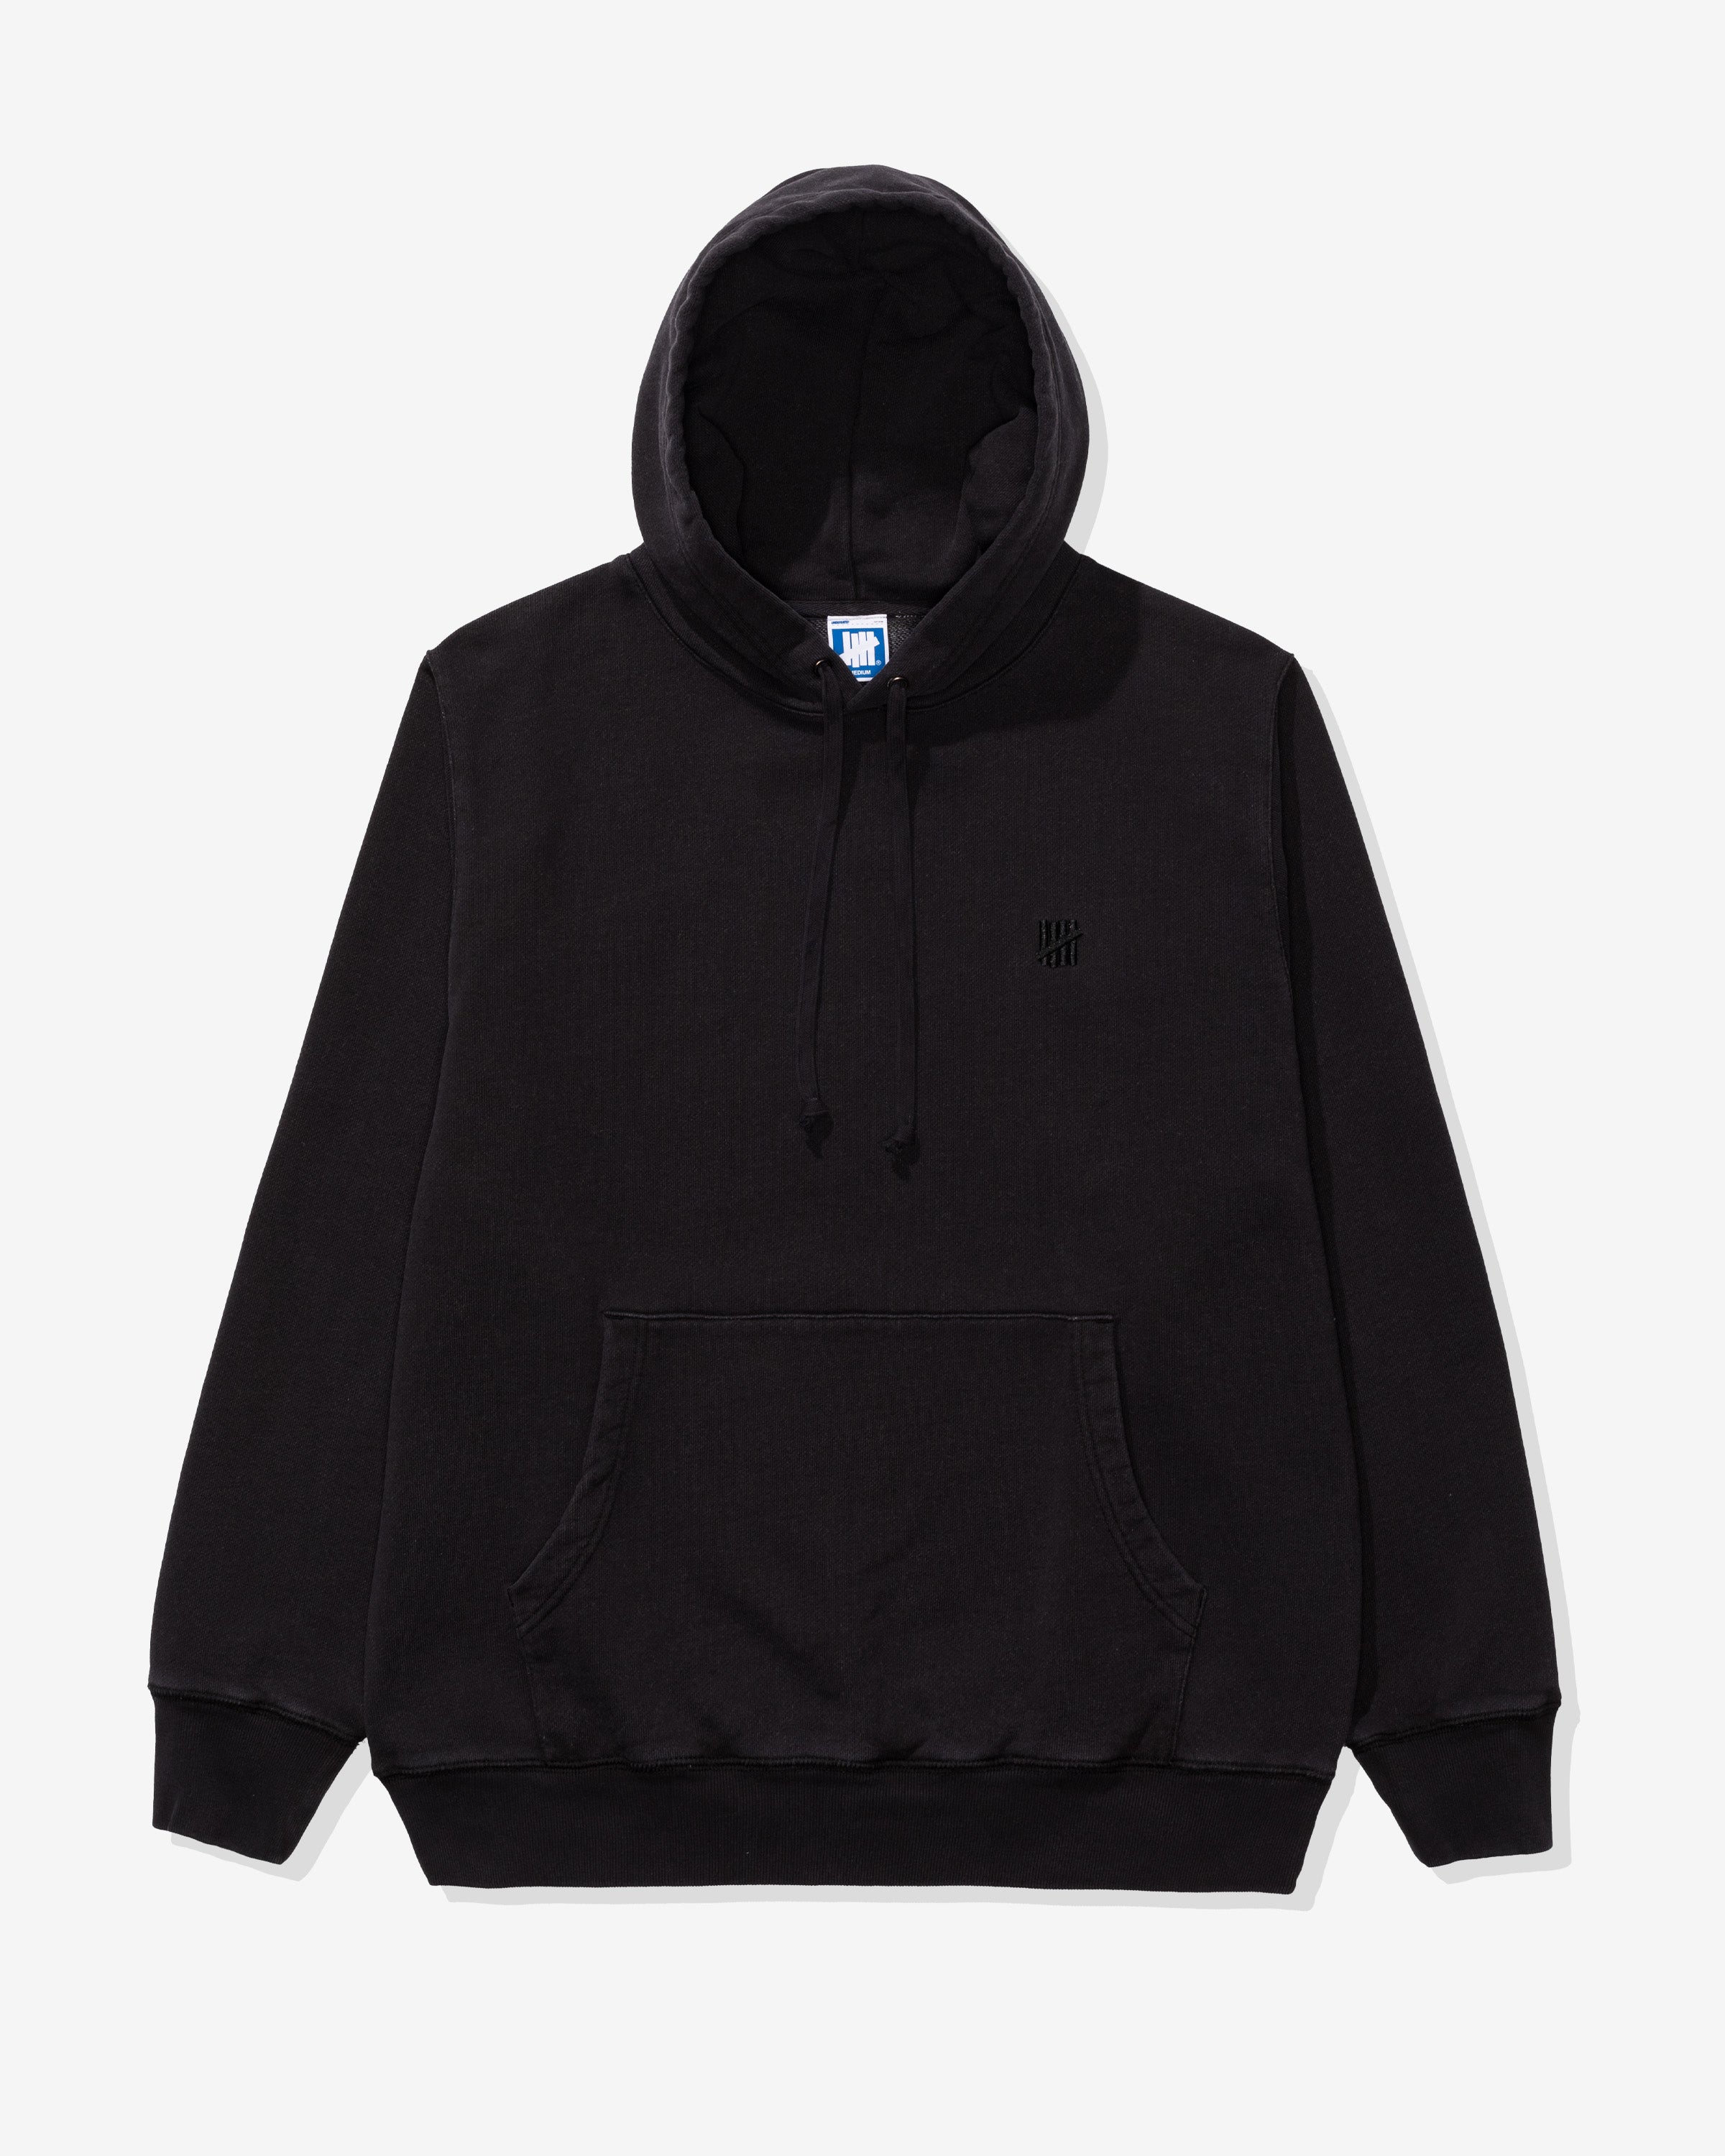 UNDEFEATED ICON PULLOVER HOOD - UL21010 - トップス